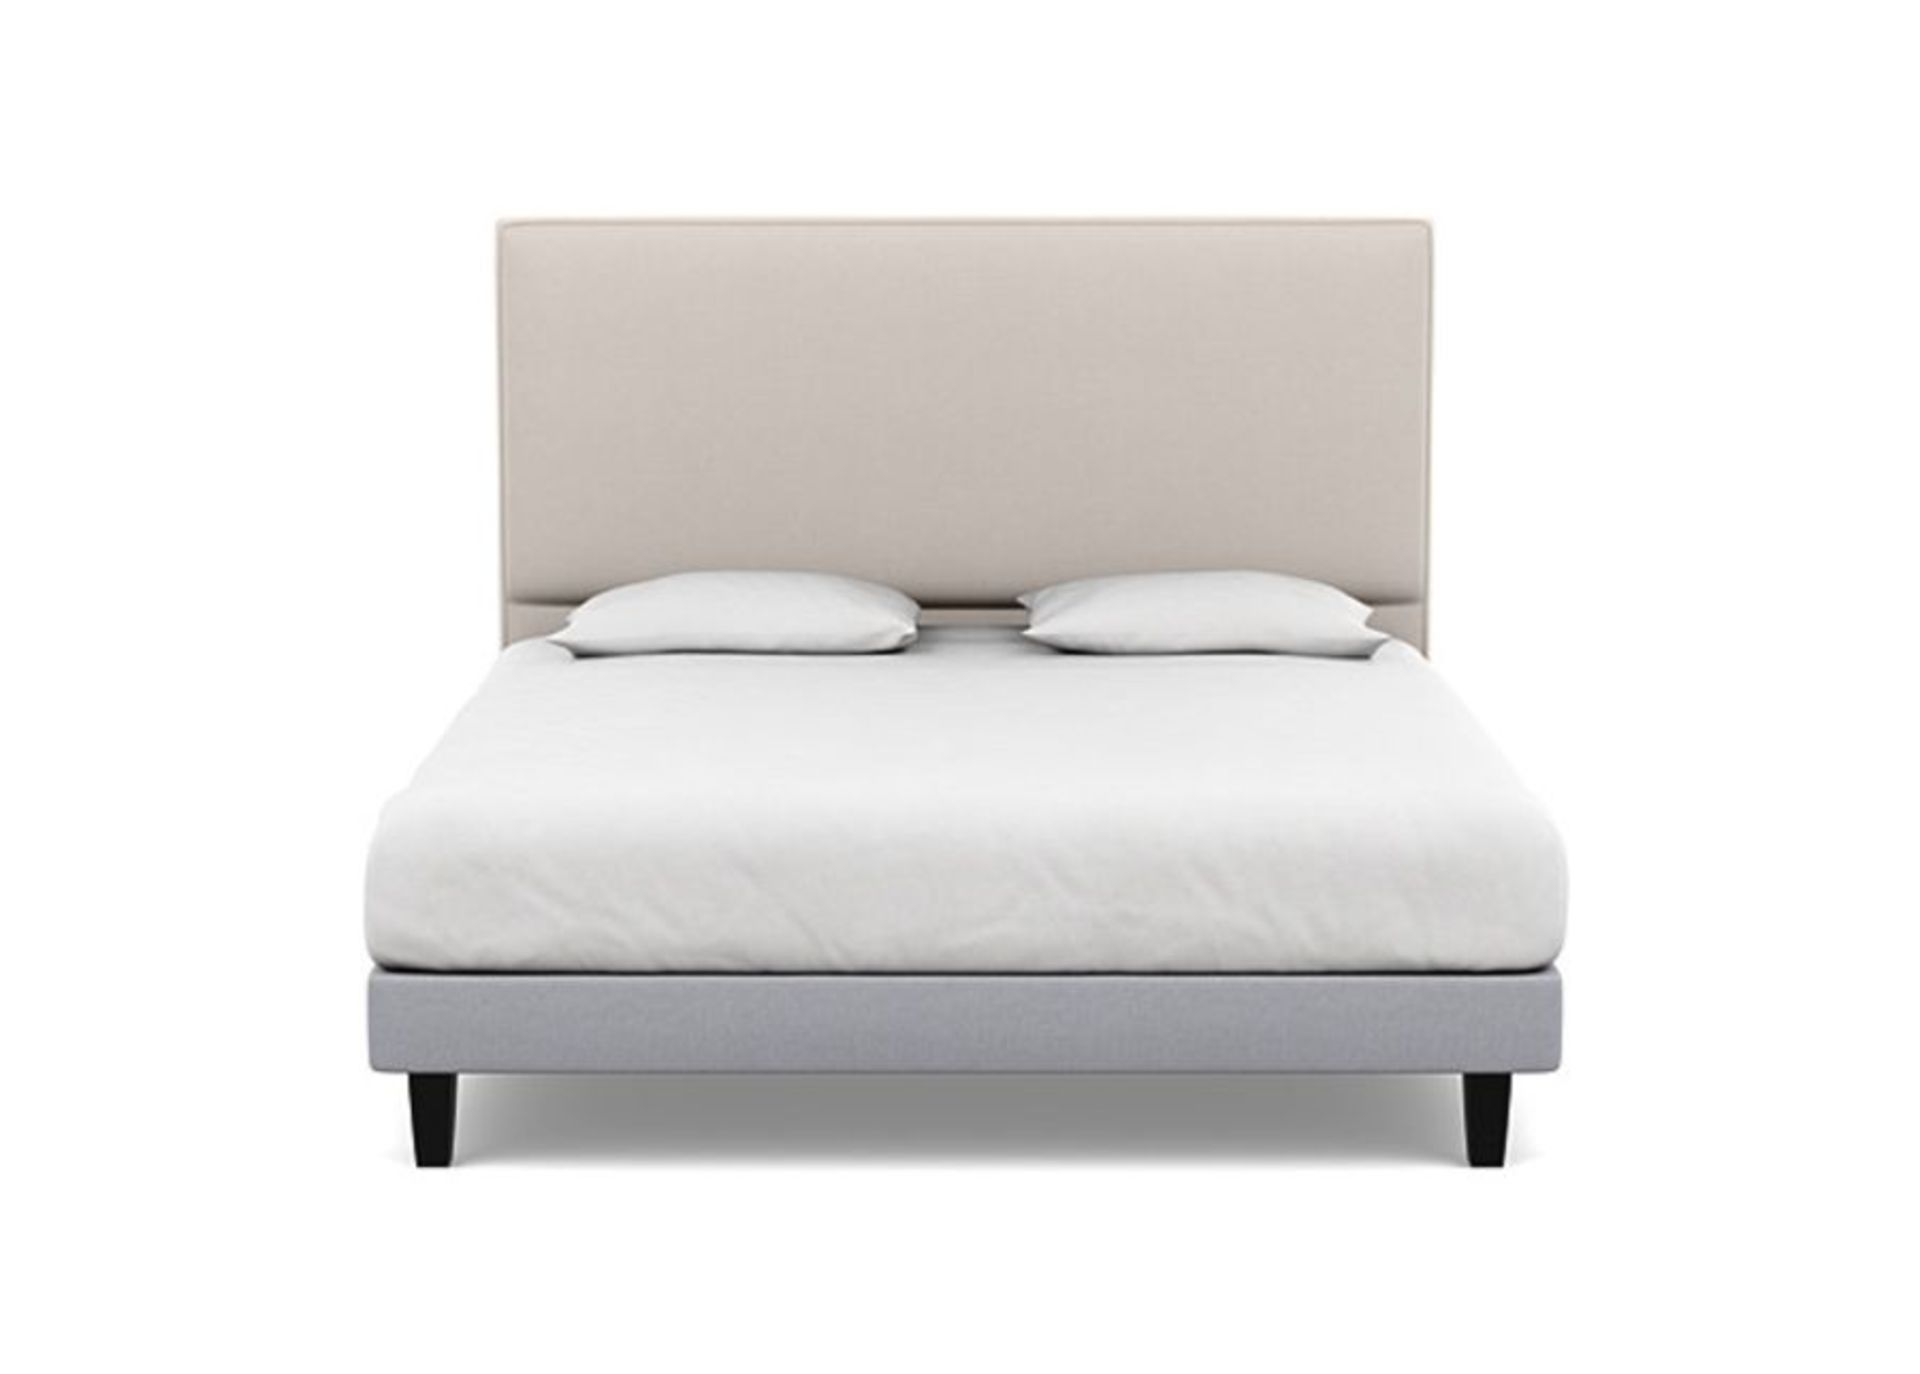 Heals Heal's Shallow Divan Super King Pewter and Cream Cotton Dark Solid Wood RRP ?1059.00 Heal's - Image 5 of 7